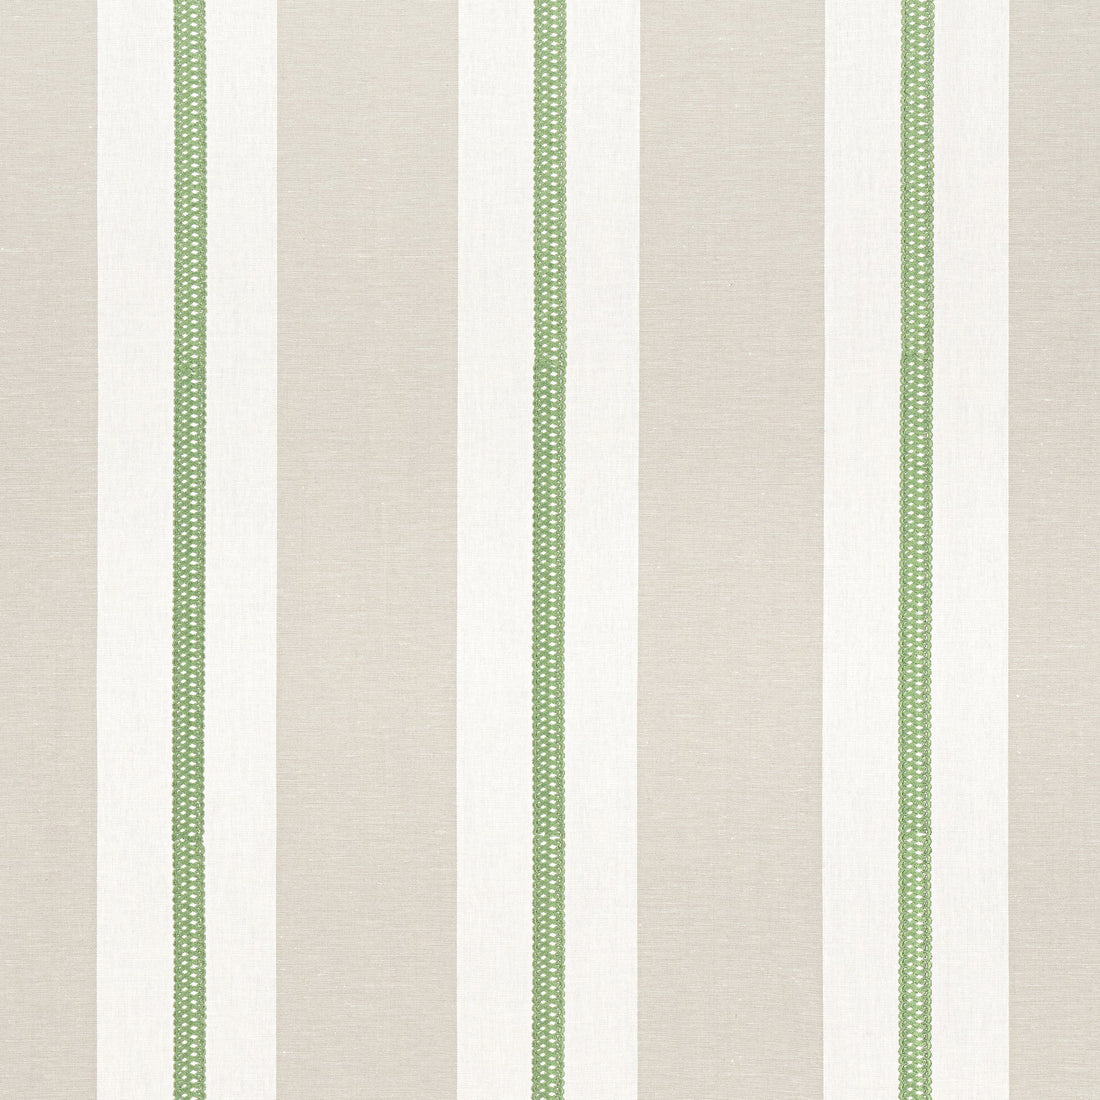 Alden Stripe Embroidery fabric in Kelly color - pattern number AW24530 - by Anna French in the Devon collection